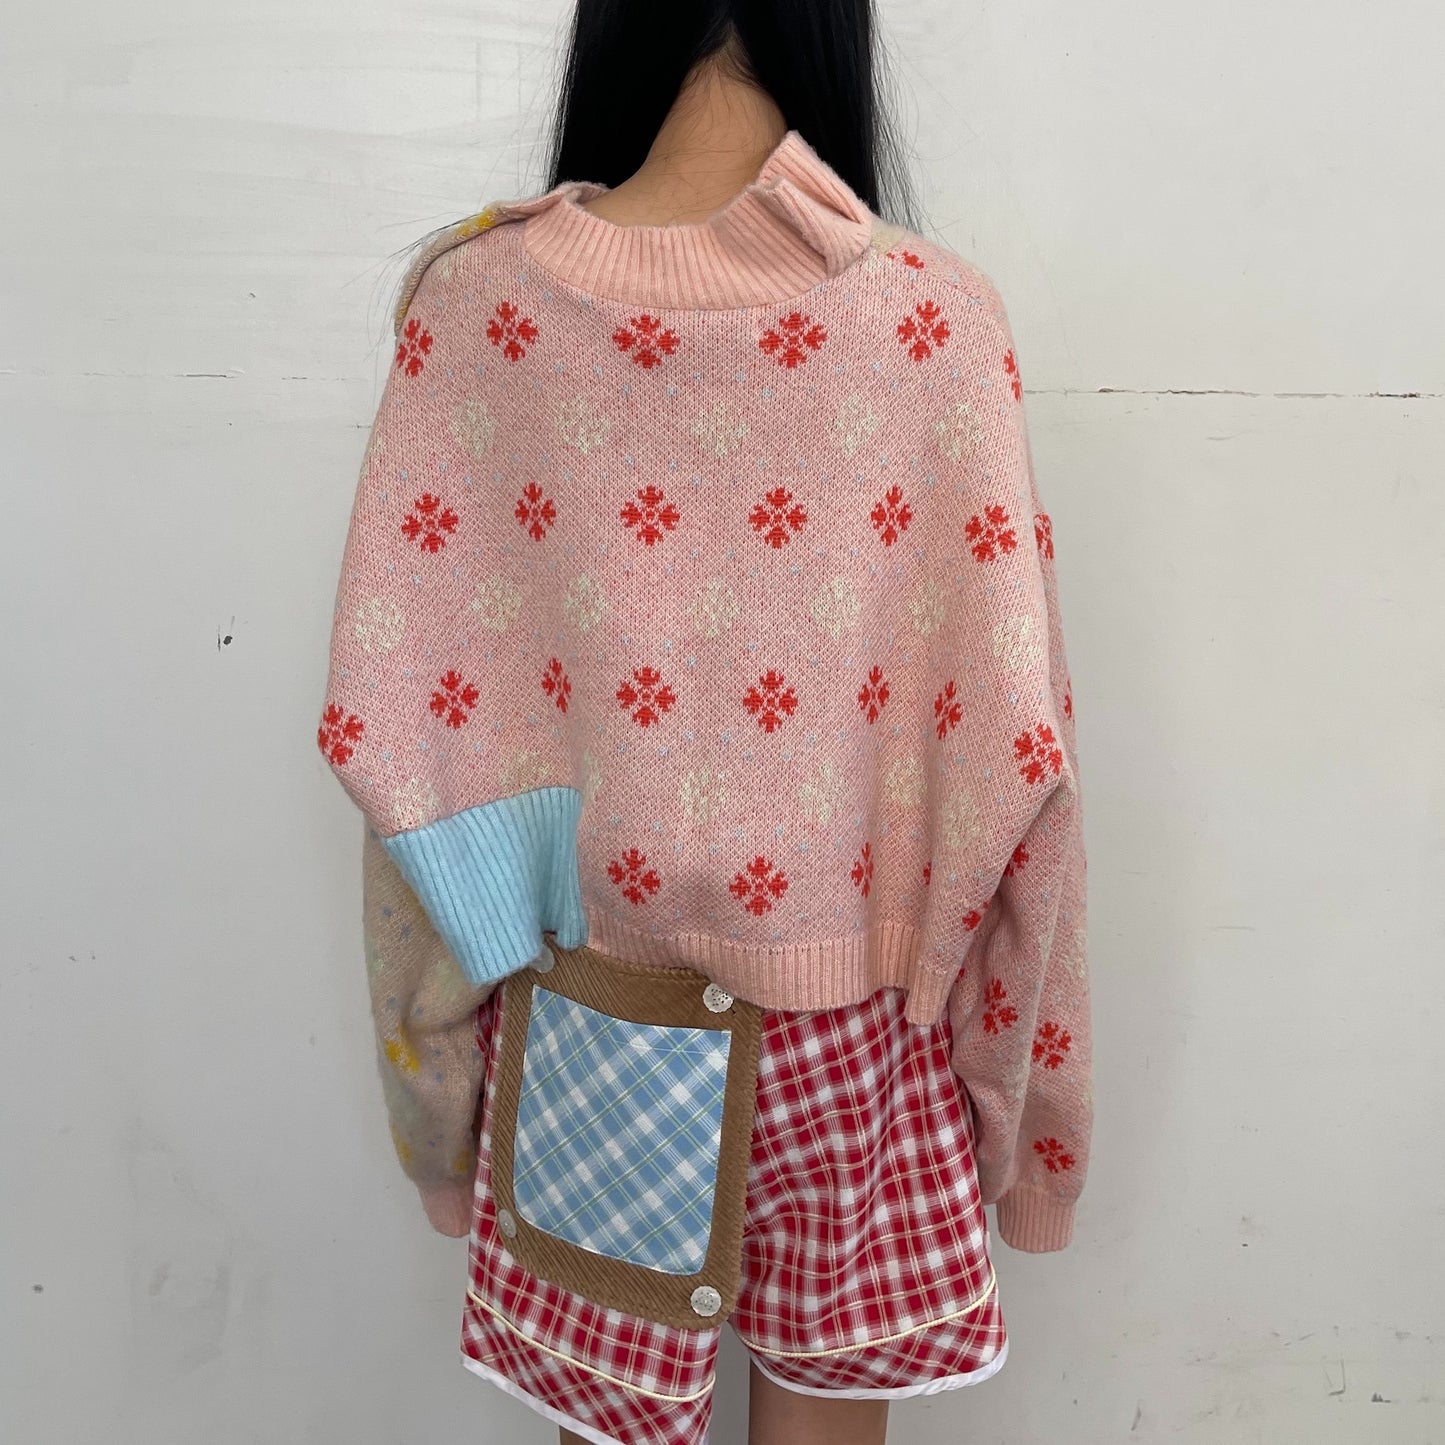 MIKIOSAKABE / FLOWER KNIT PULLOVER / PINK COMBI / ニット